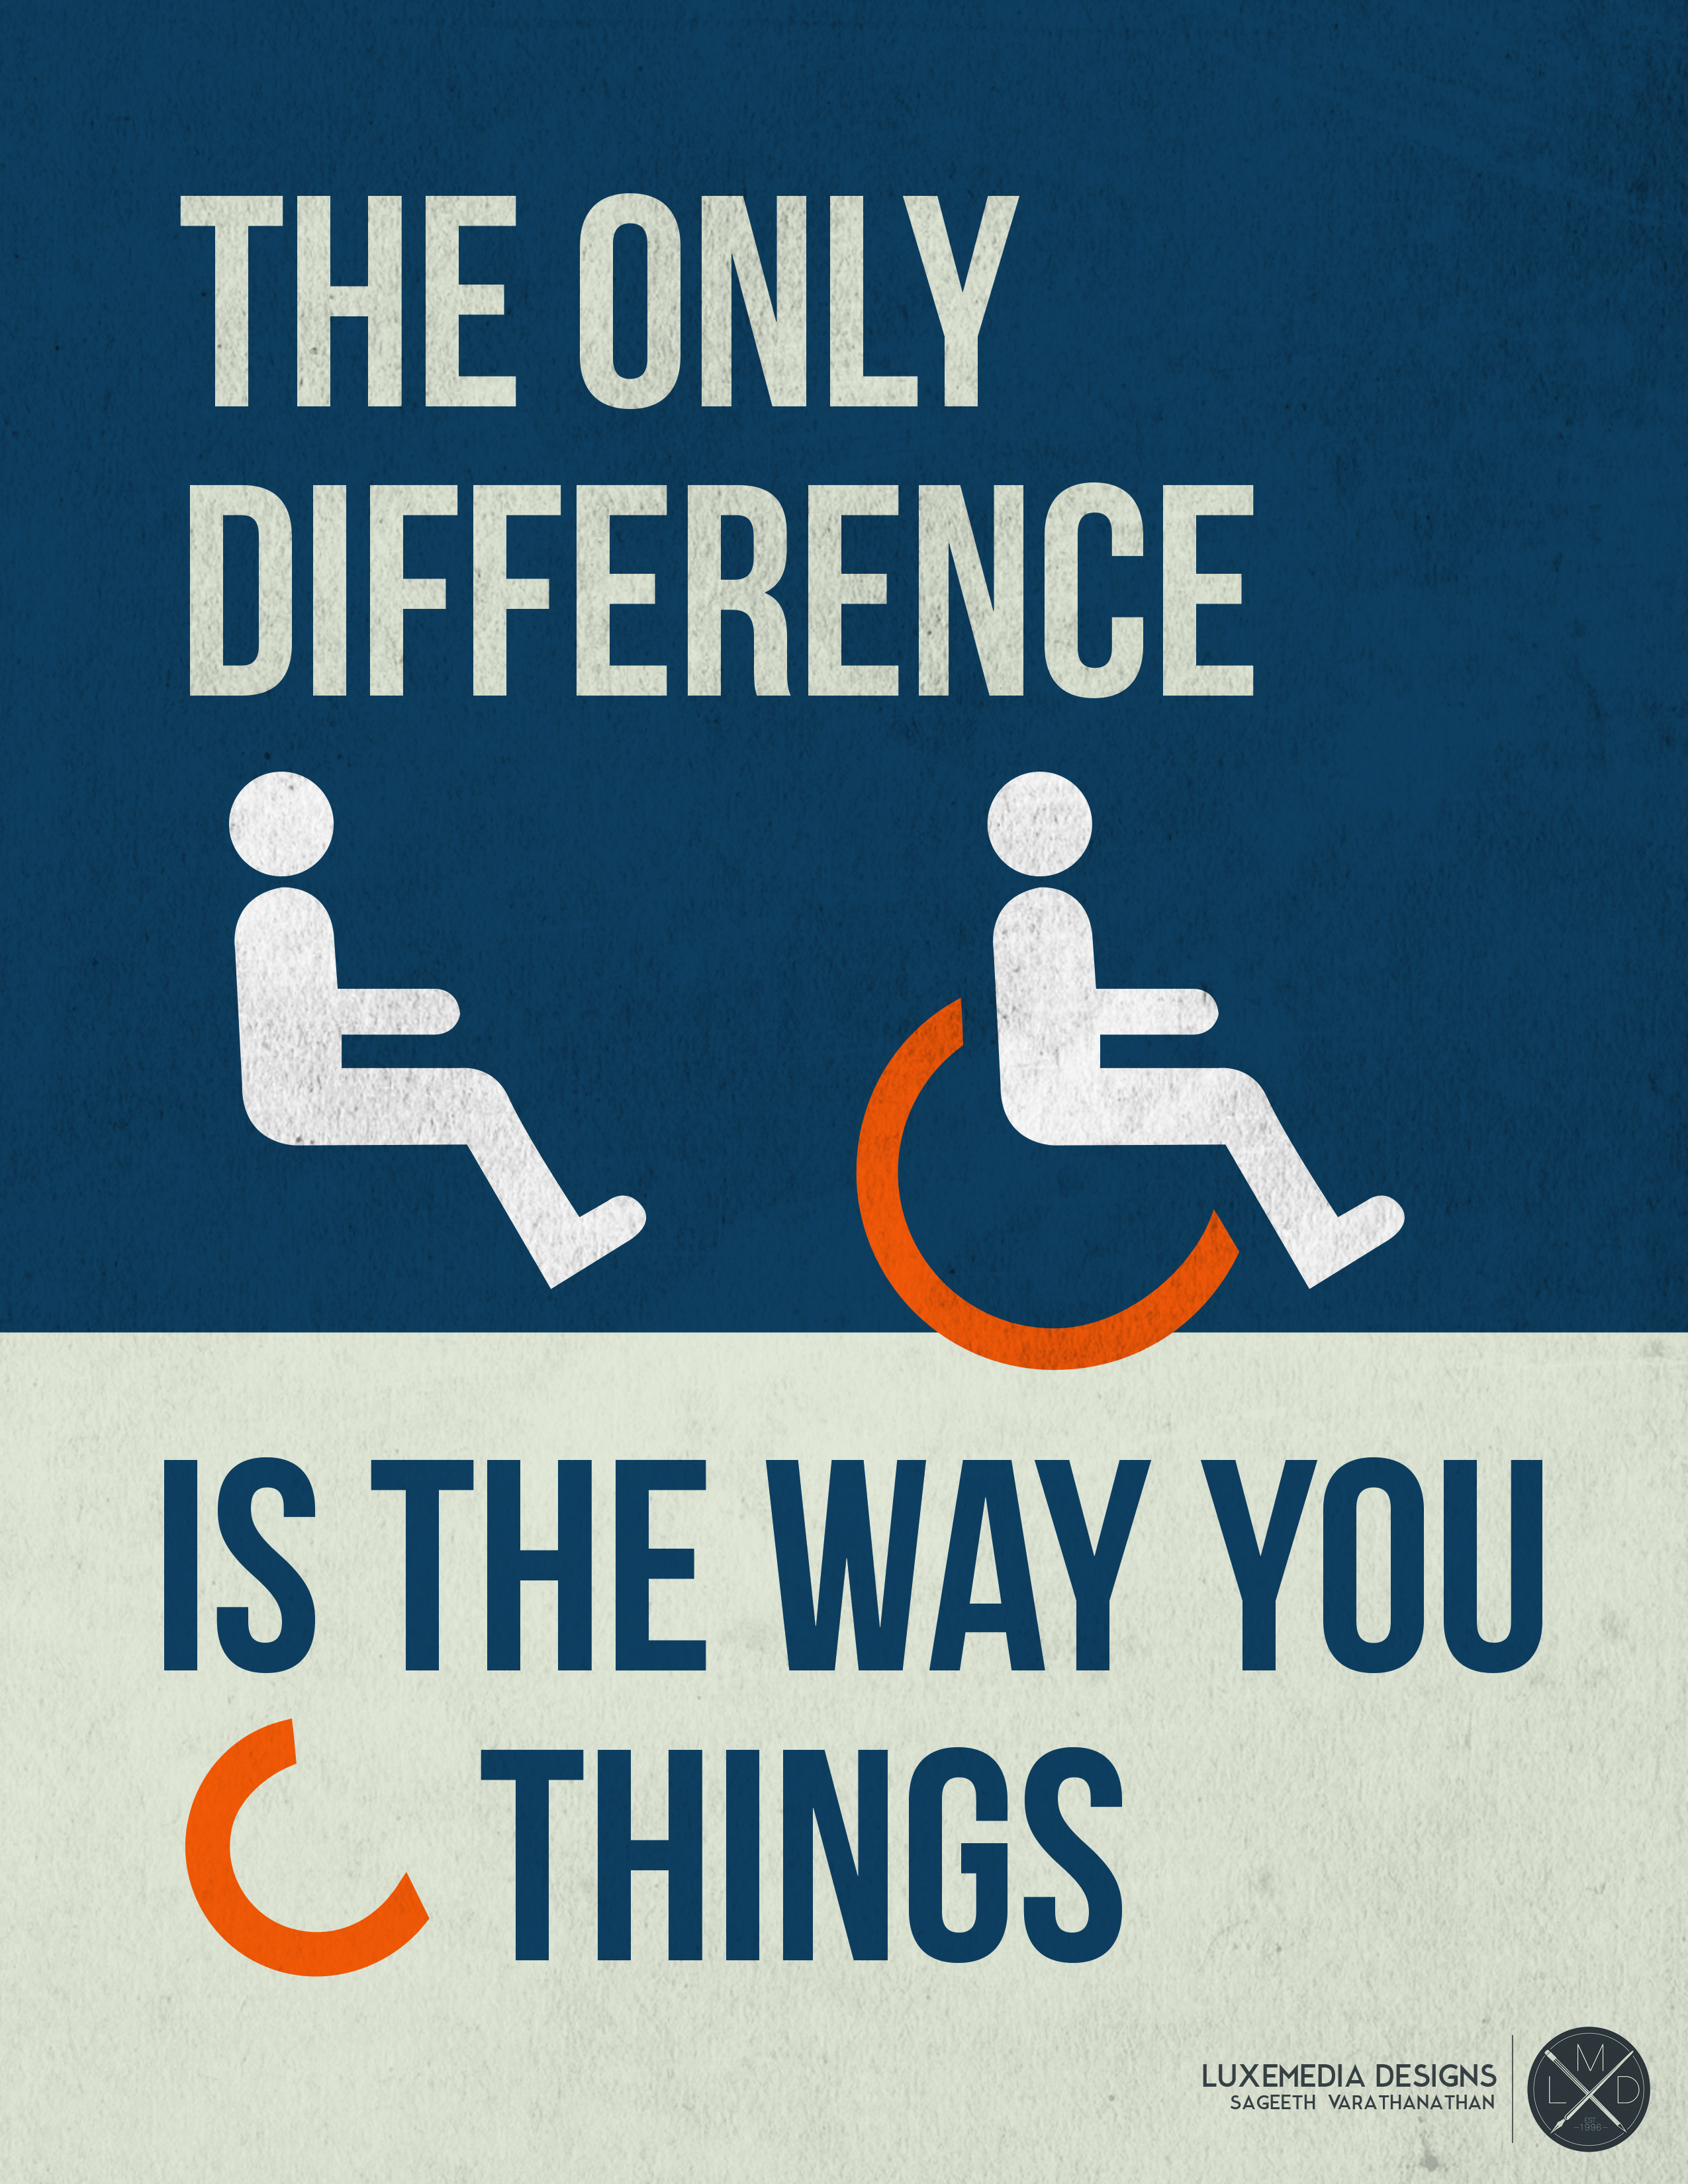 Wheelchair image saying, the only difference is the way you see things